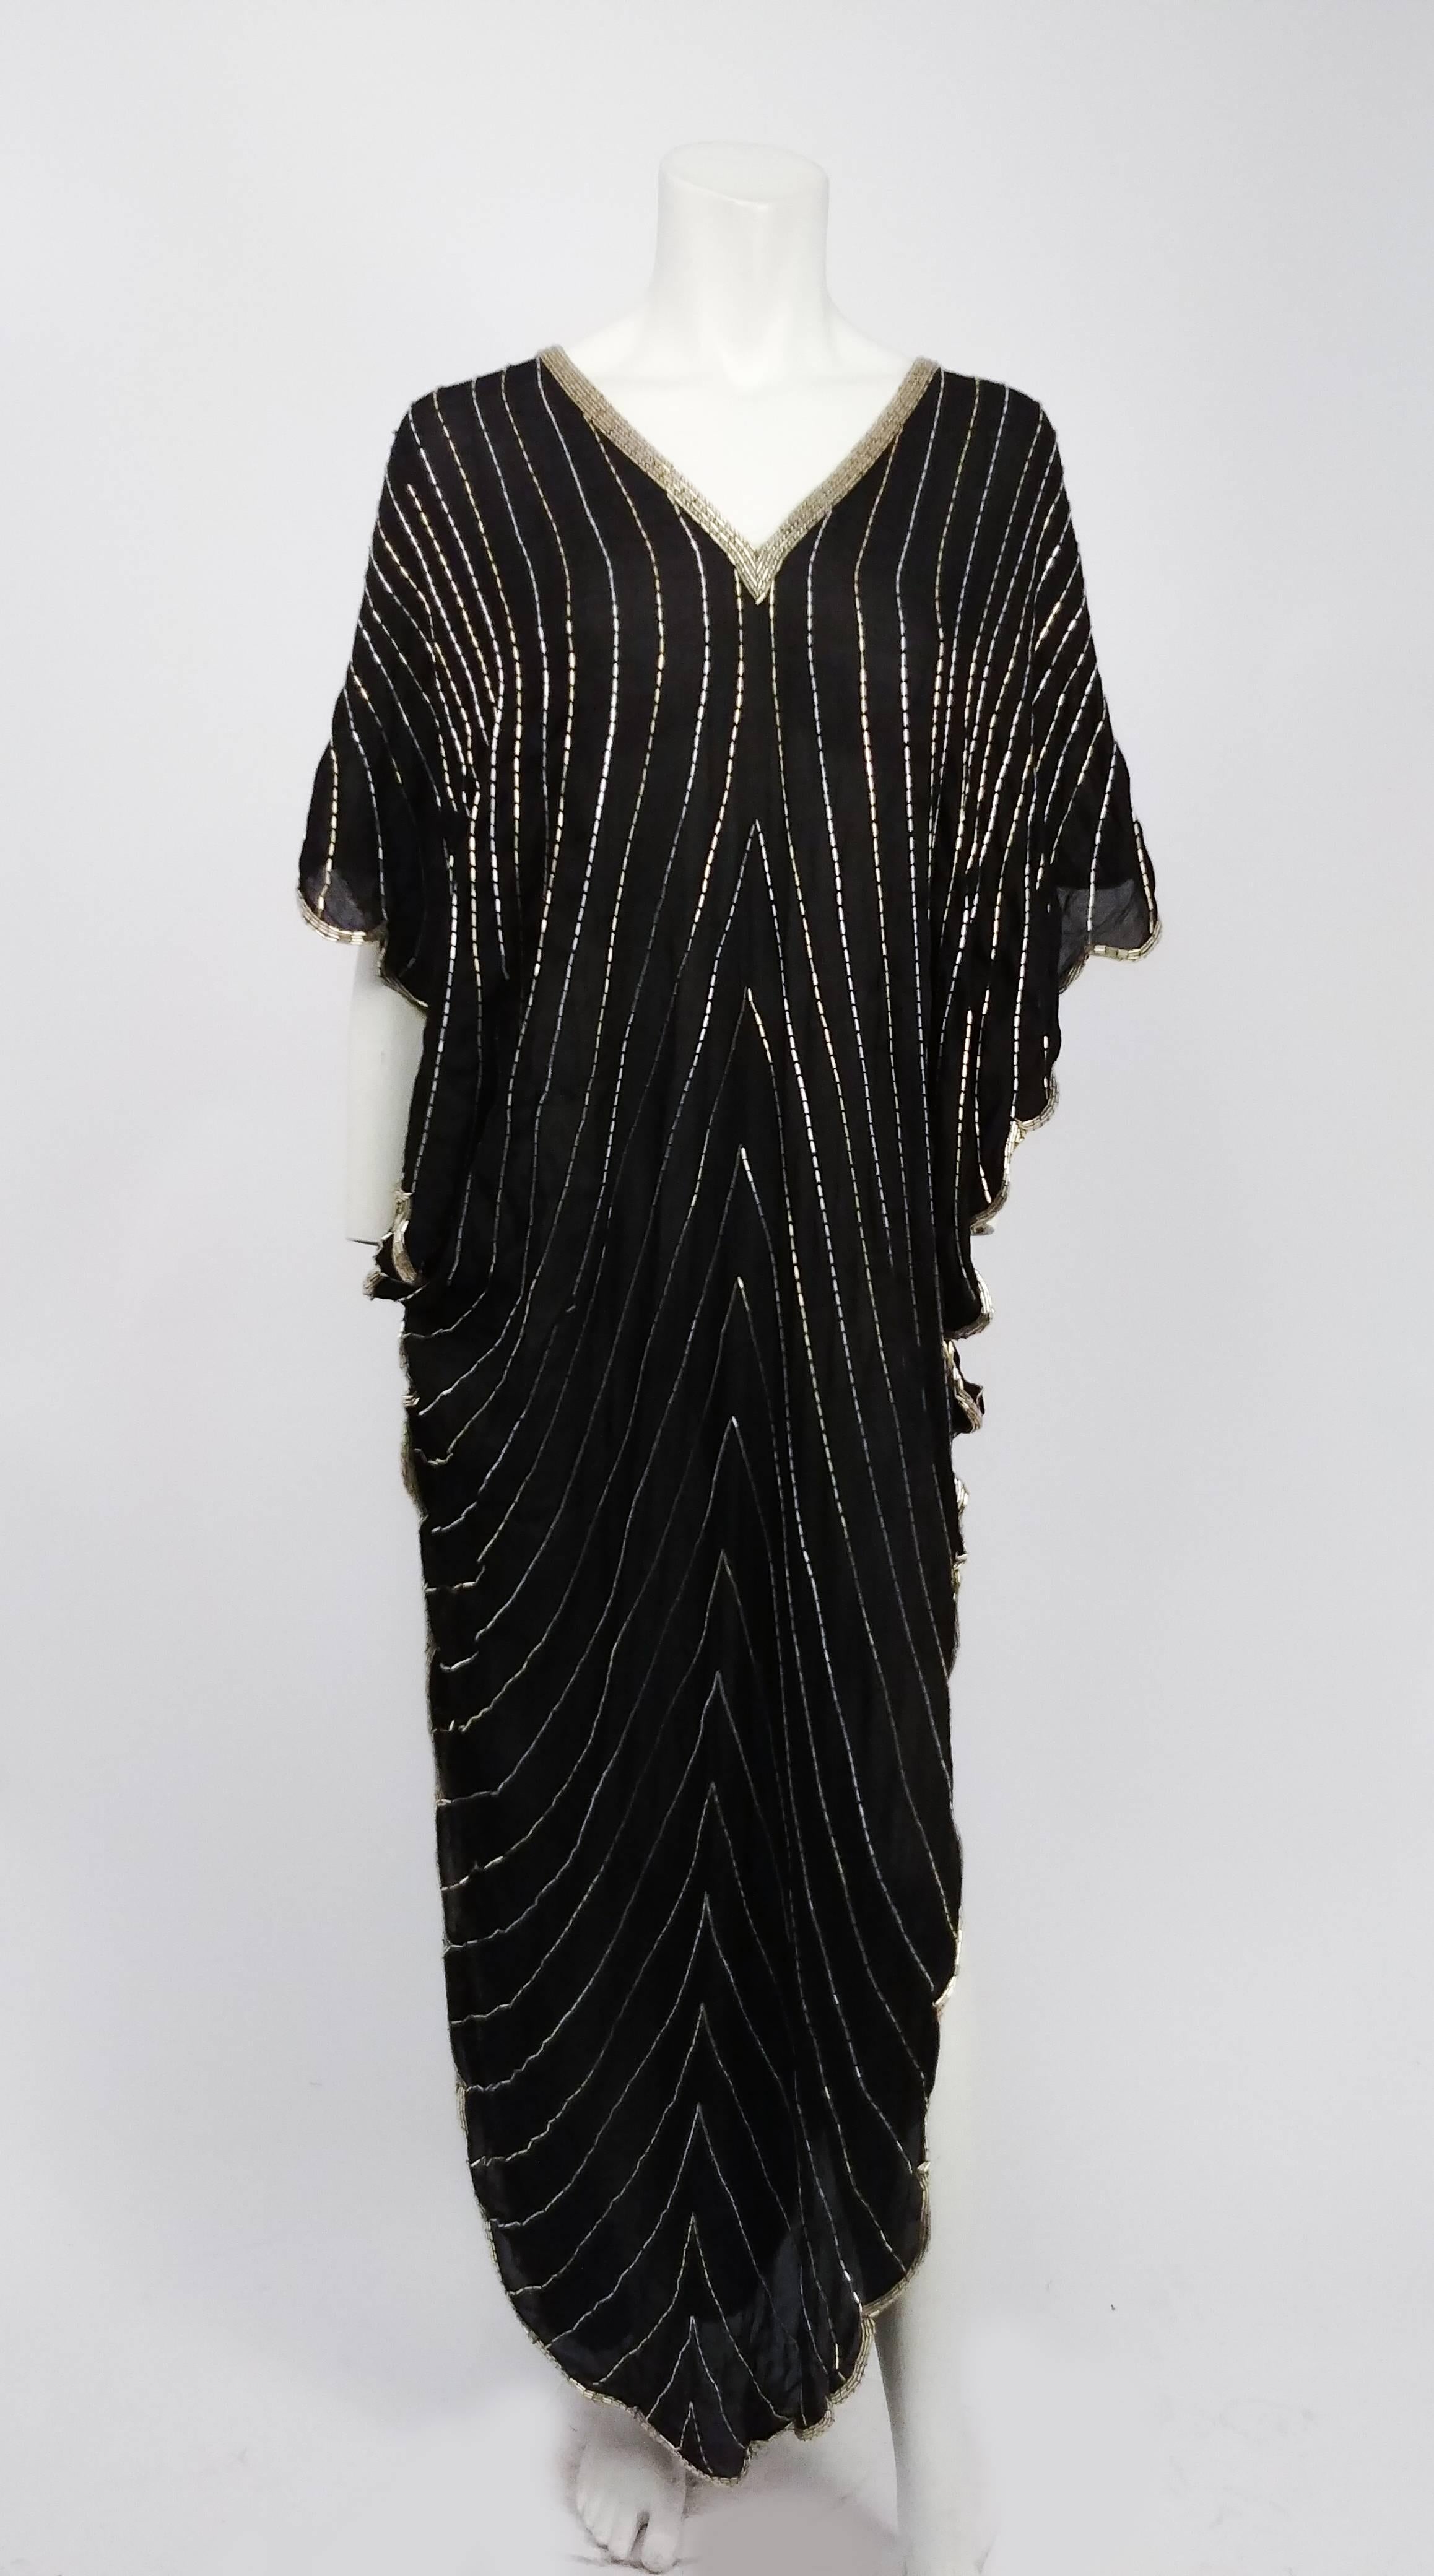 1980s Judith Ann Scalloped Silk Chiffon Silver & Black Caftan. Black silk base with silver beads in a striped pattern, and beaded collar and hem. Scalloped hem design. 